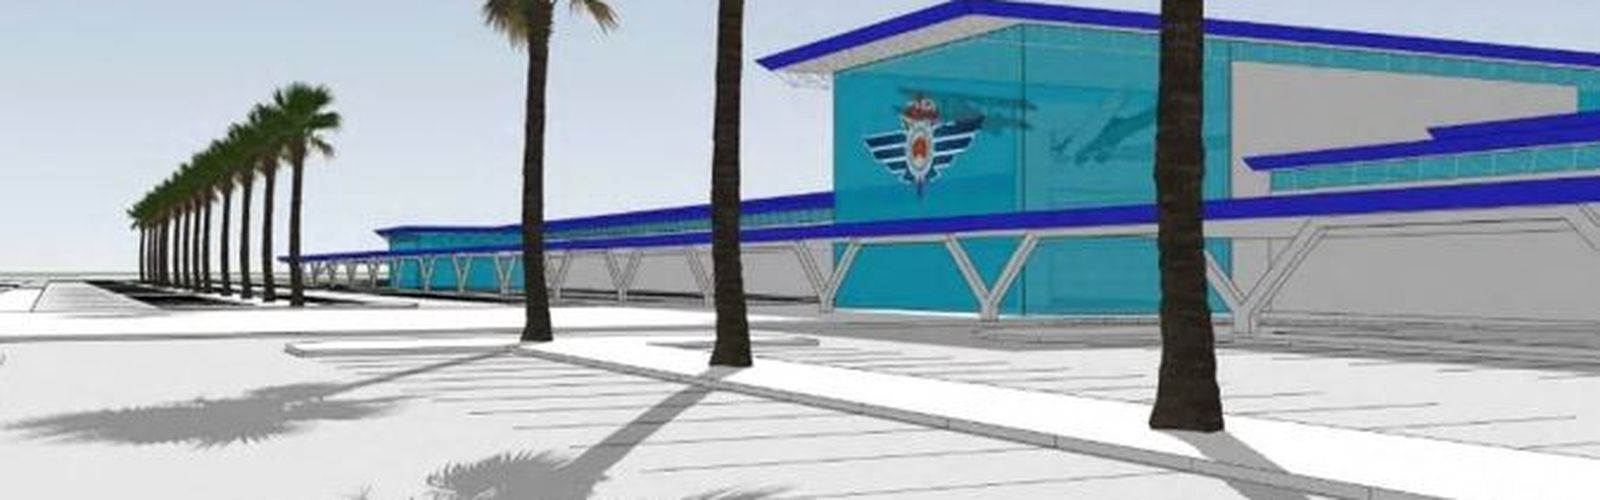 Artist impressions of the planned expansion of the Royal Flying Doctor Service's base in Townsville.